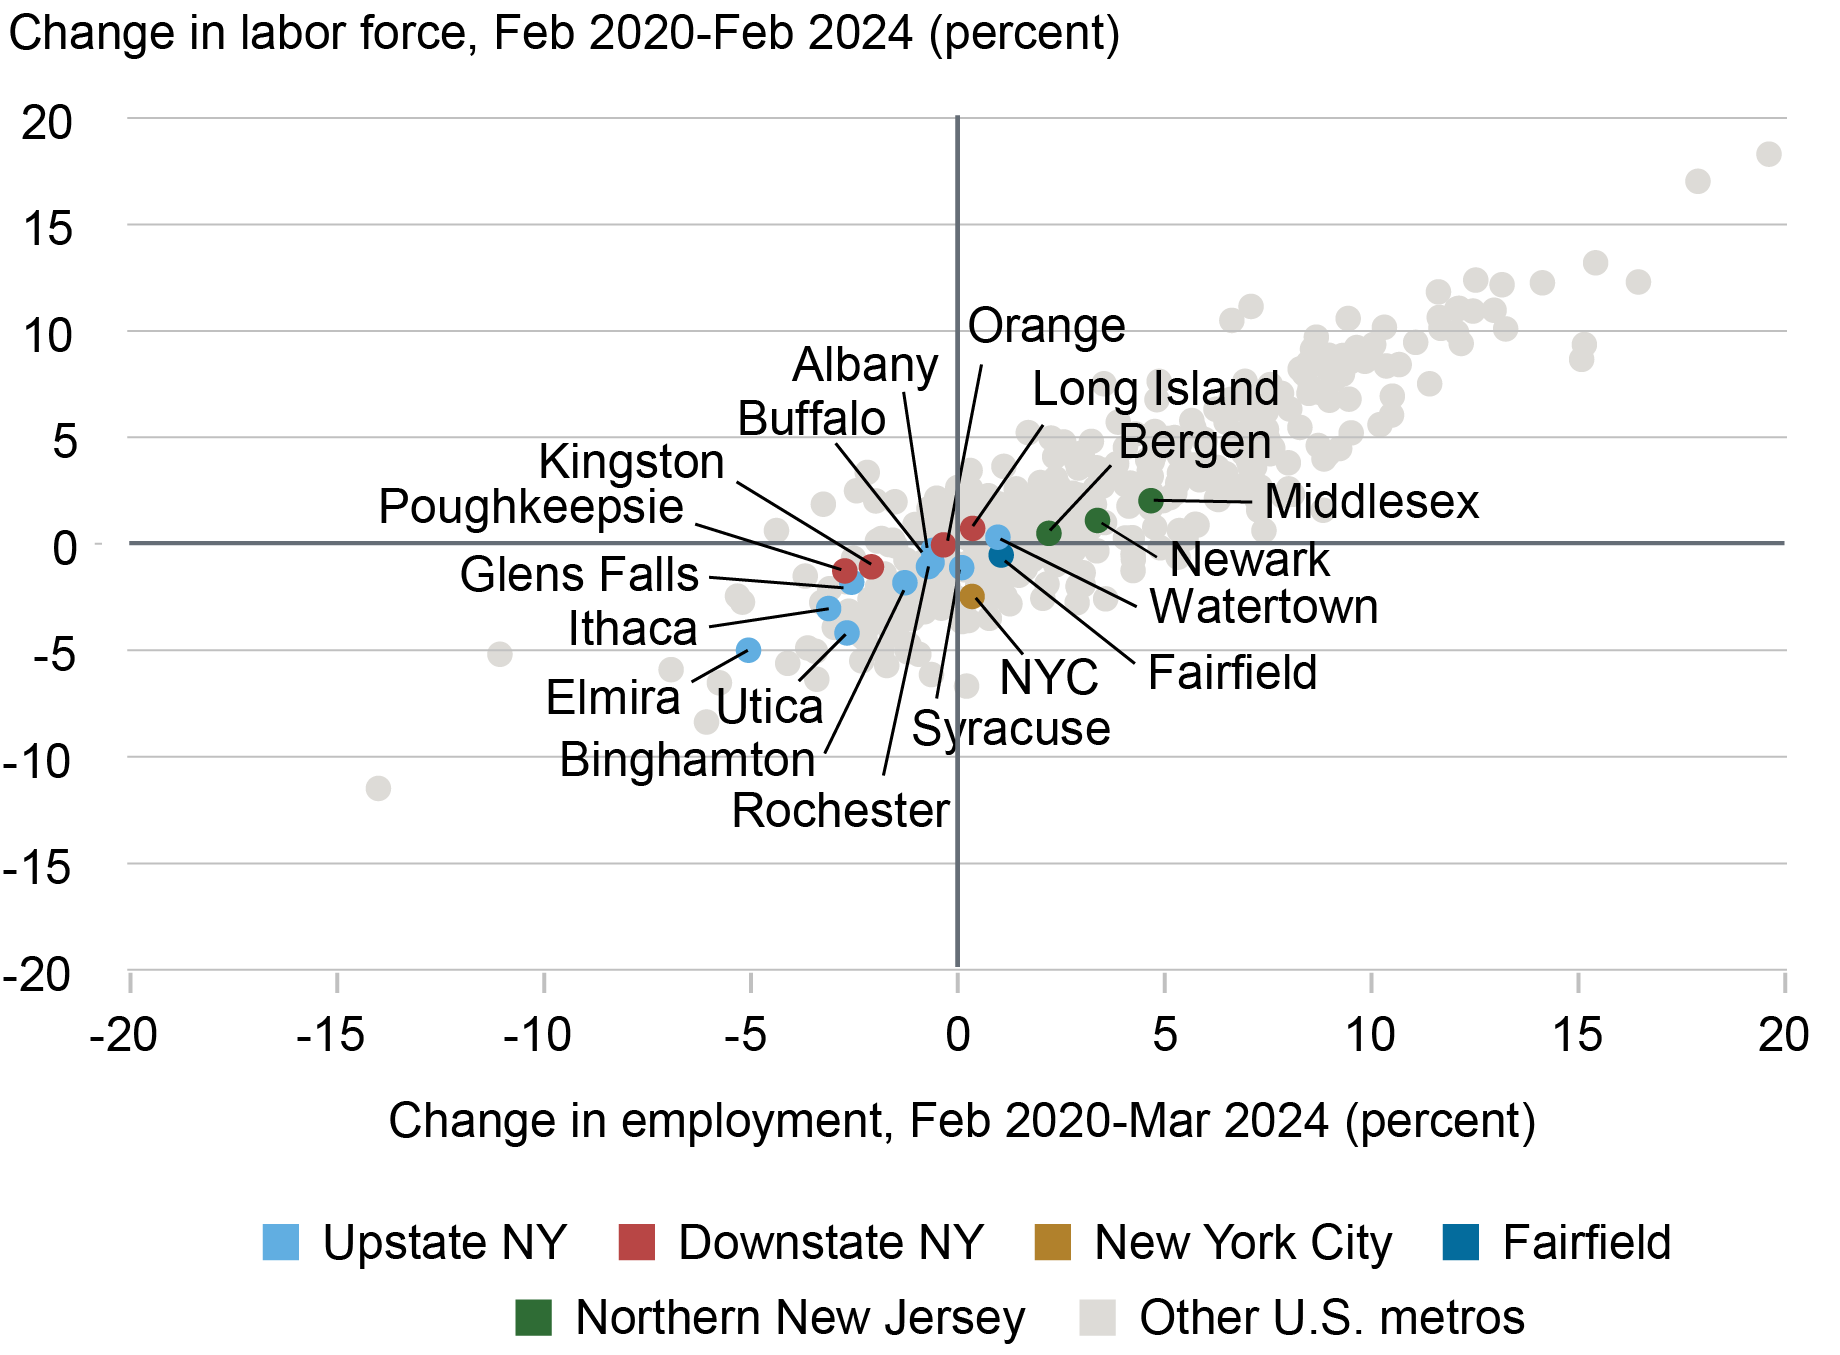 Scatter plot with four quadrants, showing the percent change in labor force against the percent change in employment for all metro areas in the U.S. Areas in the NY/NJ region are shown as colored dots corresponding to their sub-area (upstate, downstate, etc.), while gray dots represent the nation's other metros.